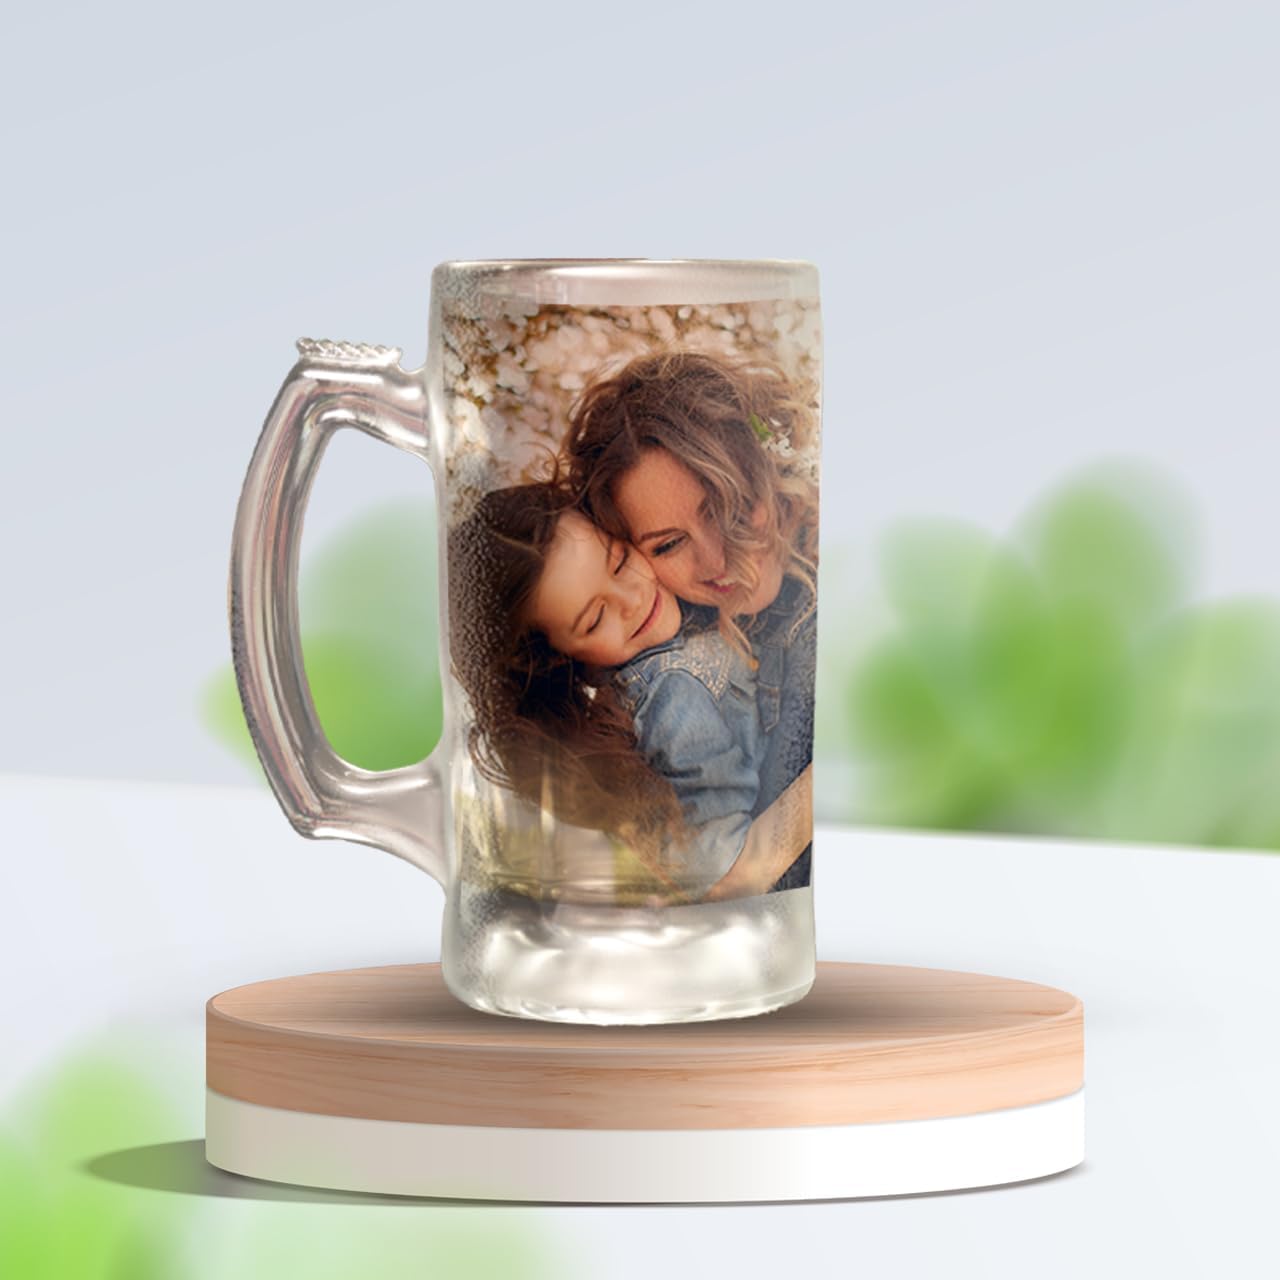 16oz-personalized-frosted-beer-mug-with-photo-logo-text